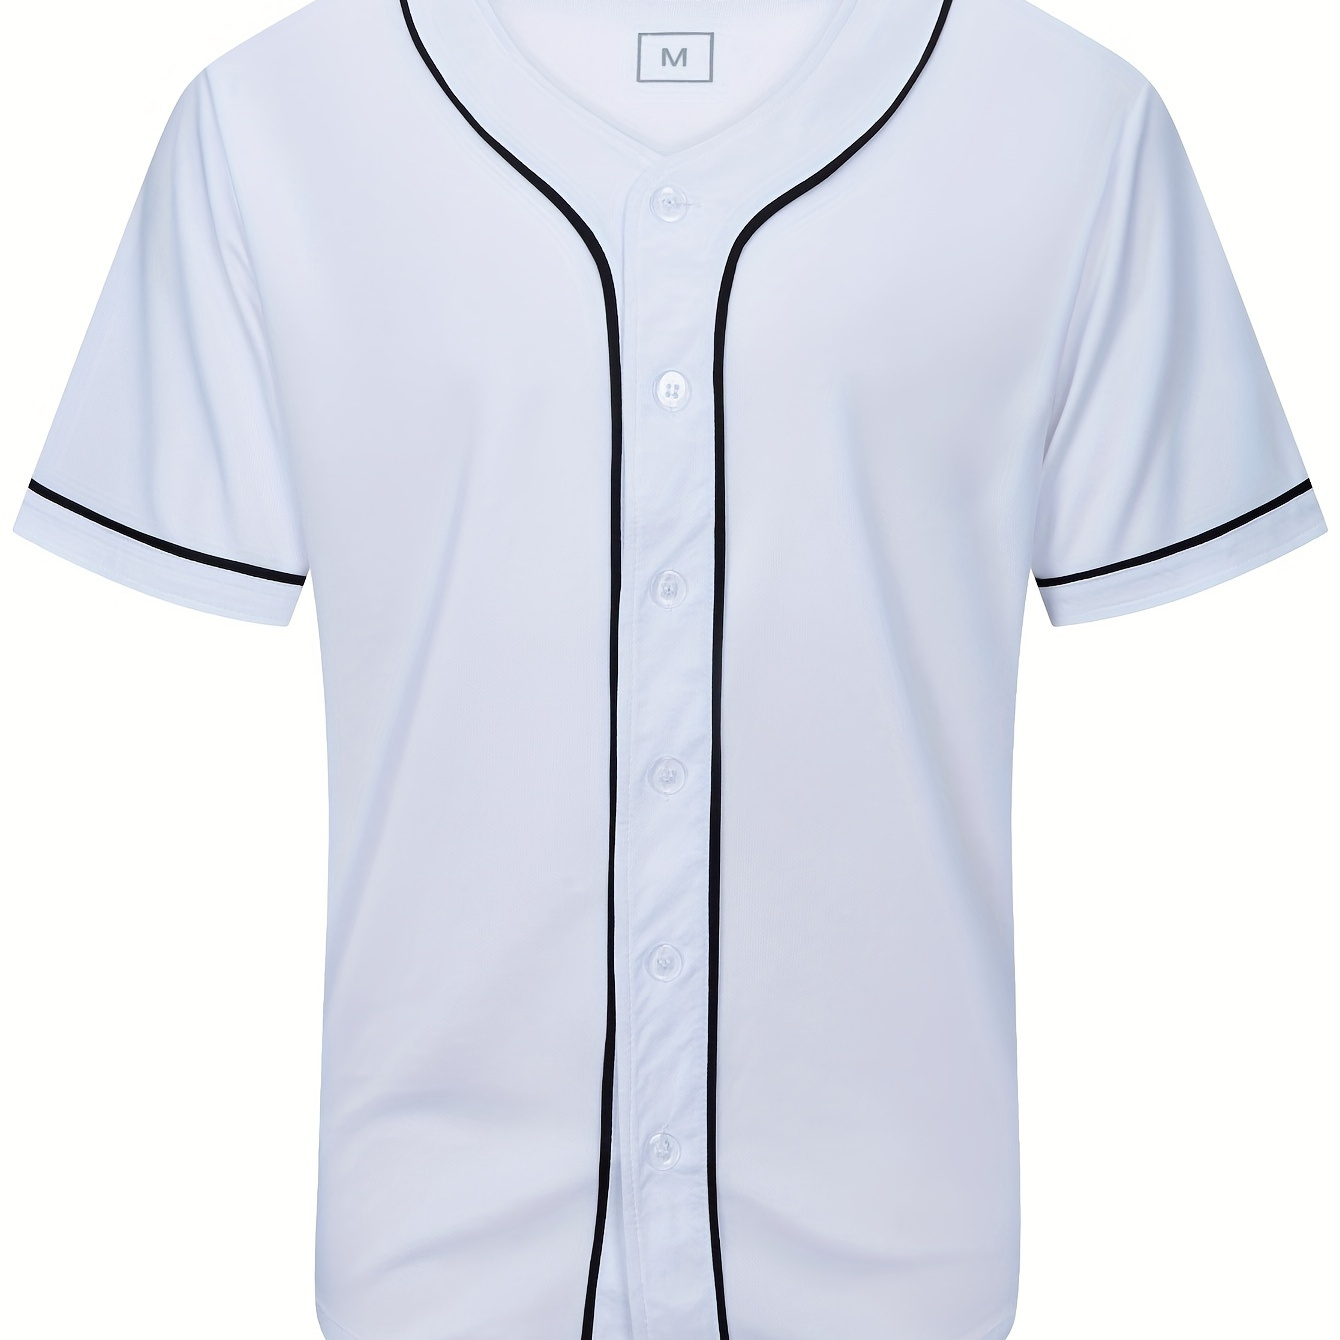 

Men's Solid Color Classic Design Baseball Jersey, Retro Baseball Shirt, Slightly Stretch Breathable Embroidery Button Sports Uniform For Training Competition Party